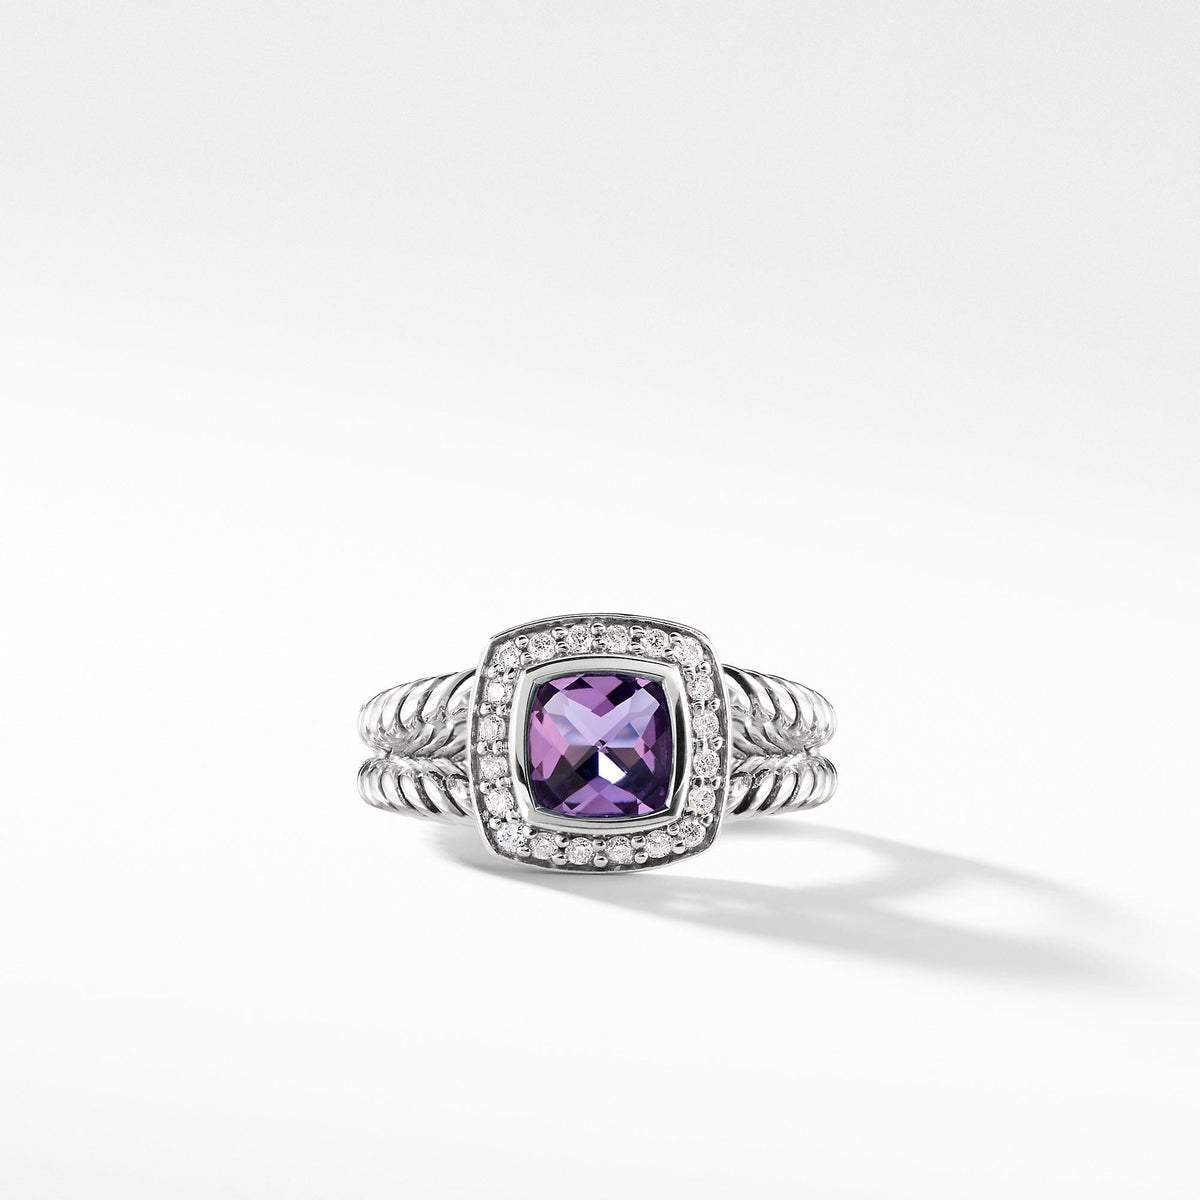 Petite Albion Ring with Amethyst and Diamonds